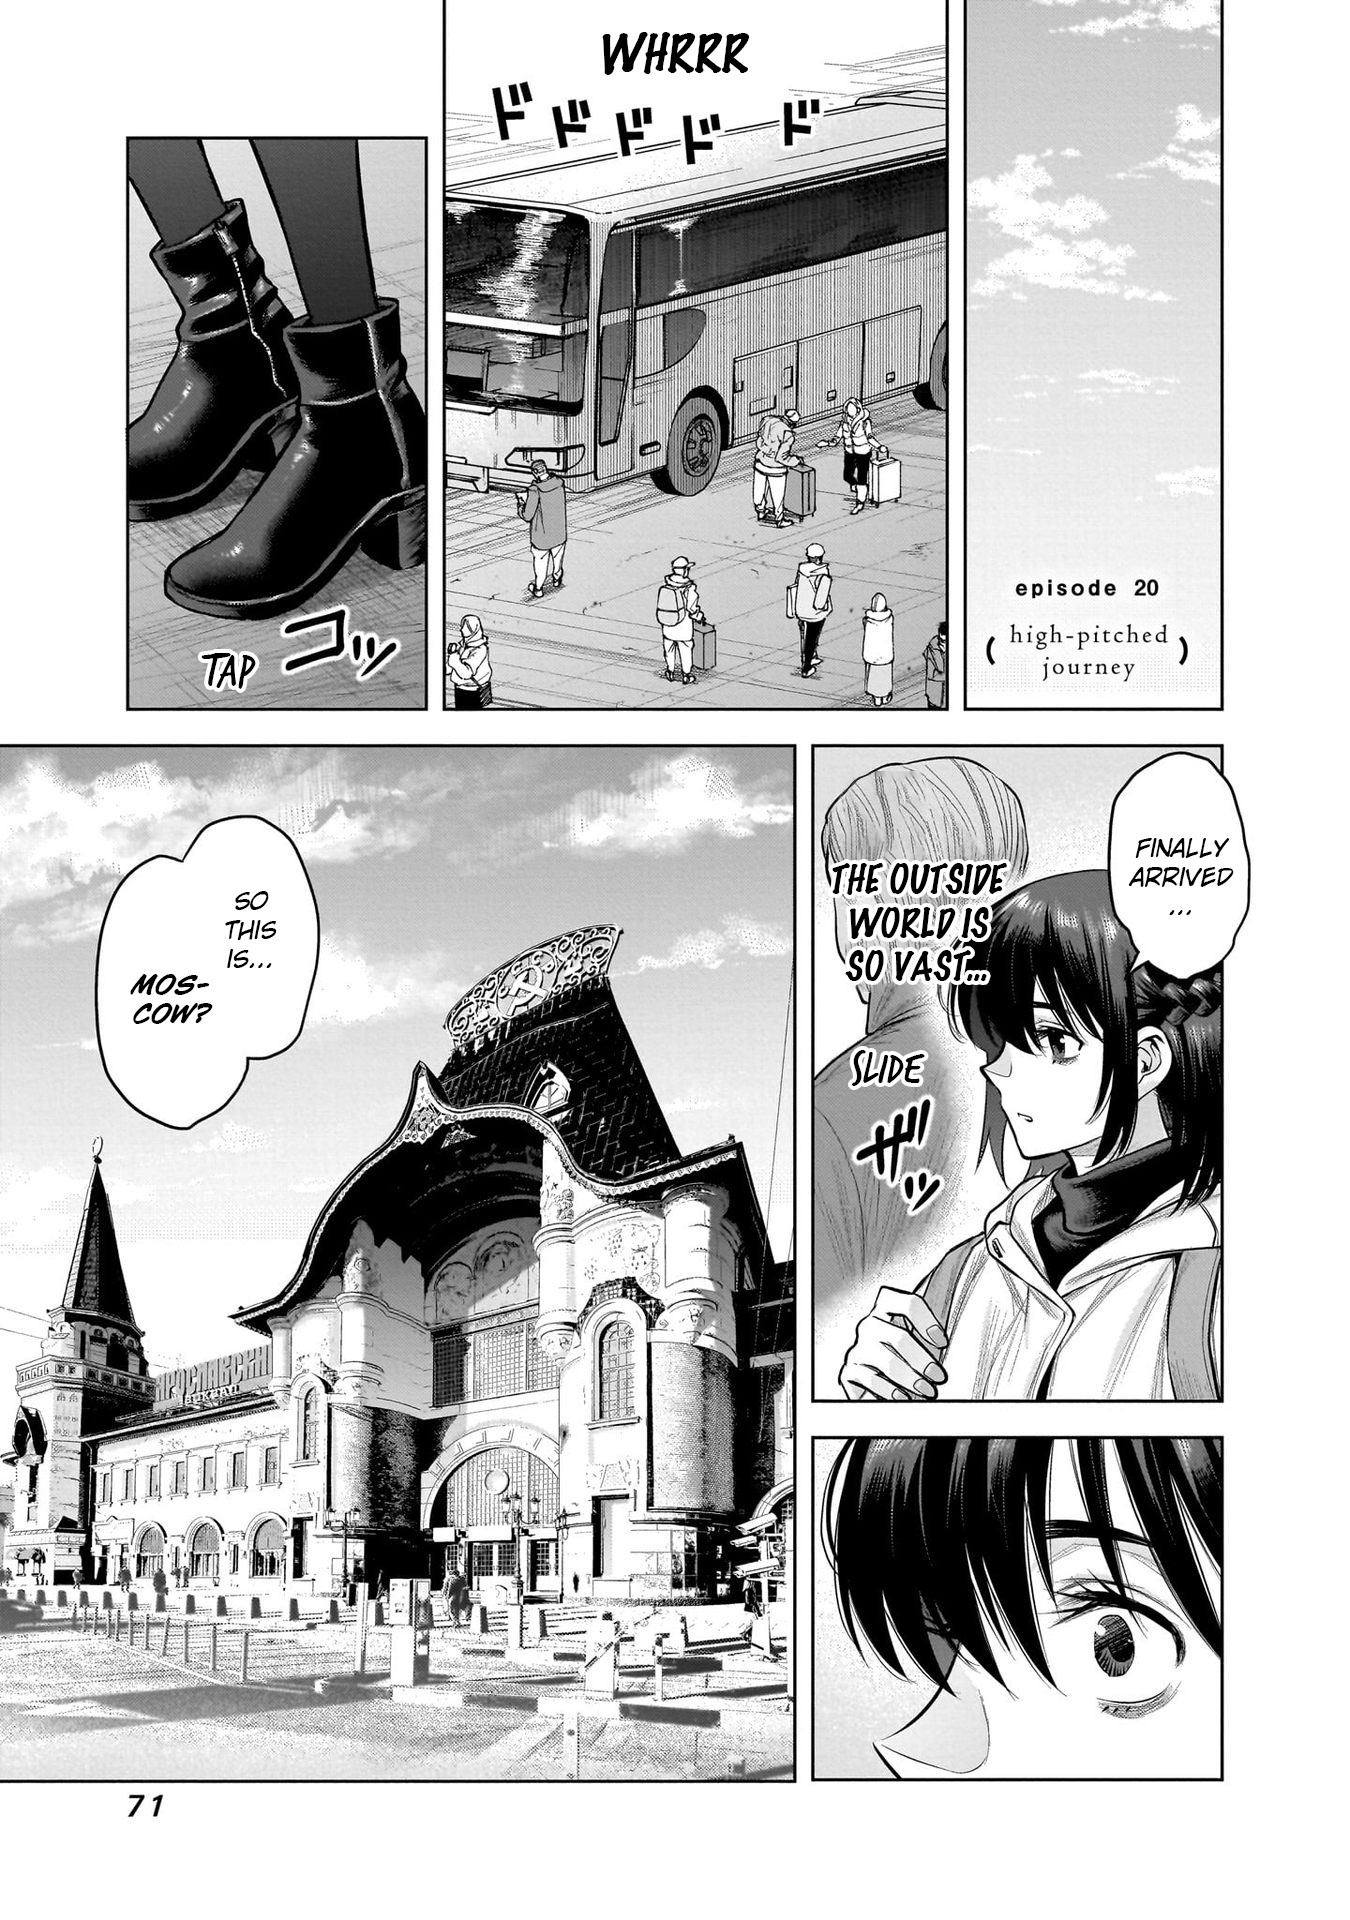 She Is Beautiful Vol.3 Chapter 20: High-Pitched Journey - Picture 1